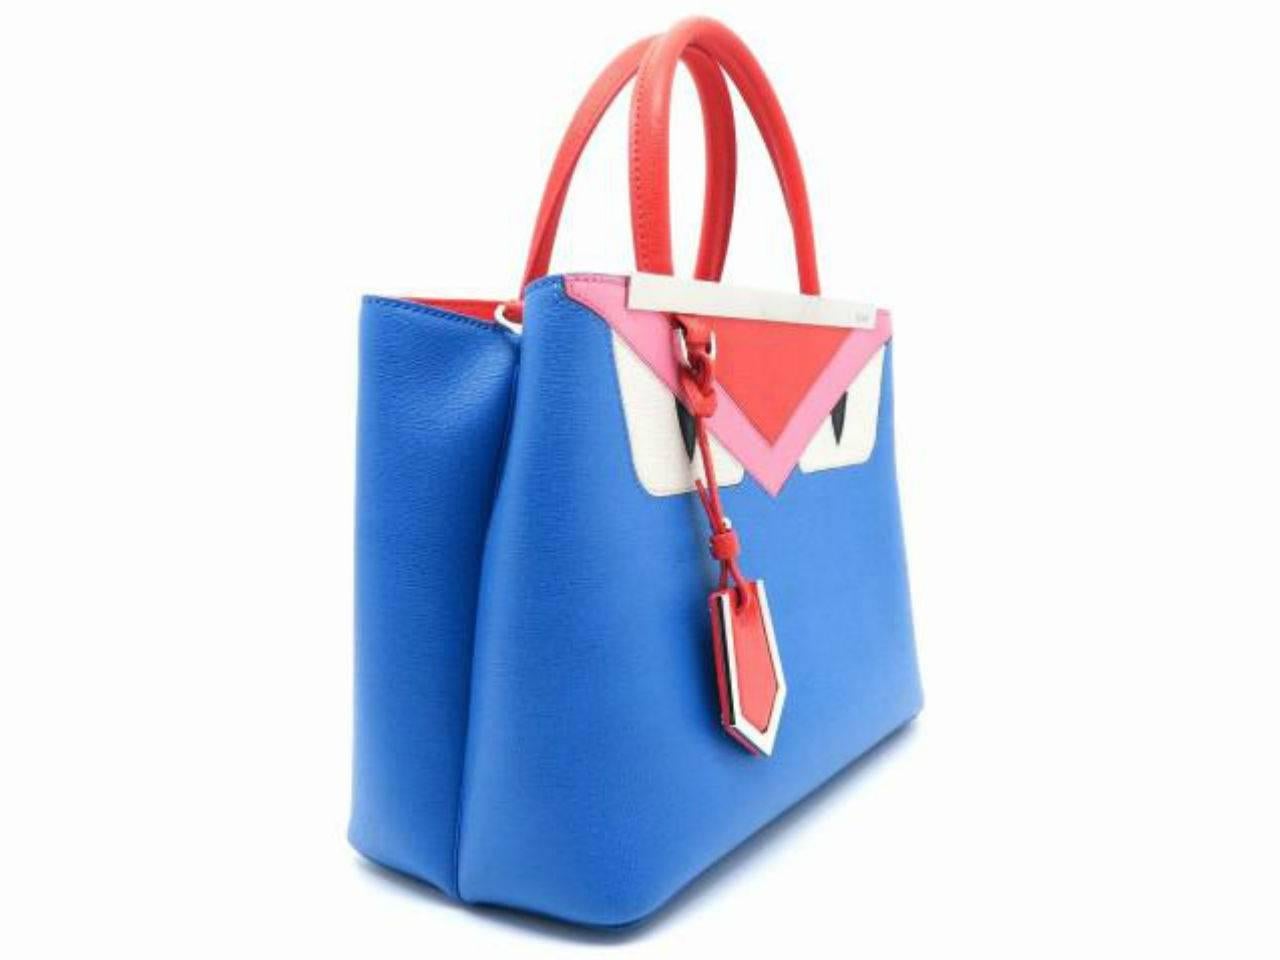 Color: Multi-color 

Material: Calfskin Leather

Condition: Rank N 
Overall: Brand New, not used
Surface: Good
Corners: Good
Edges: Good
Handles/Straps: Good
Hardware: Good

Dimension: W26.5 × H20.5 × D12.5cm（W10.4" × H8.0" ×